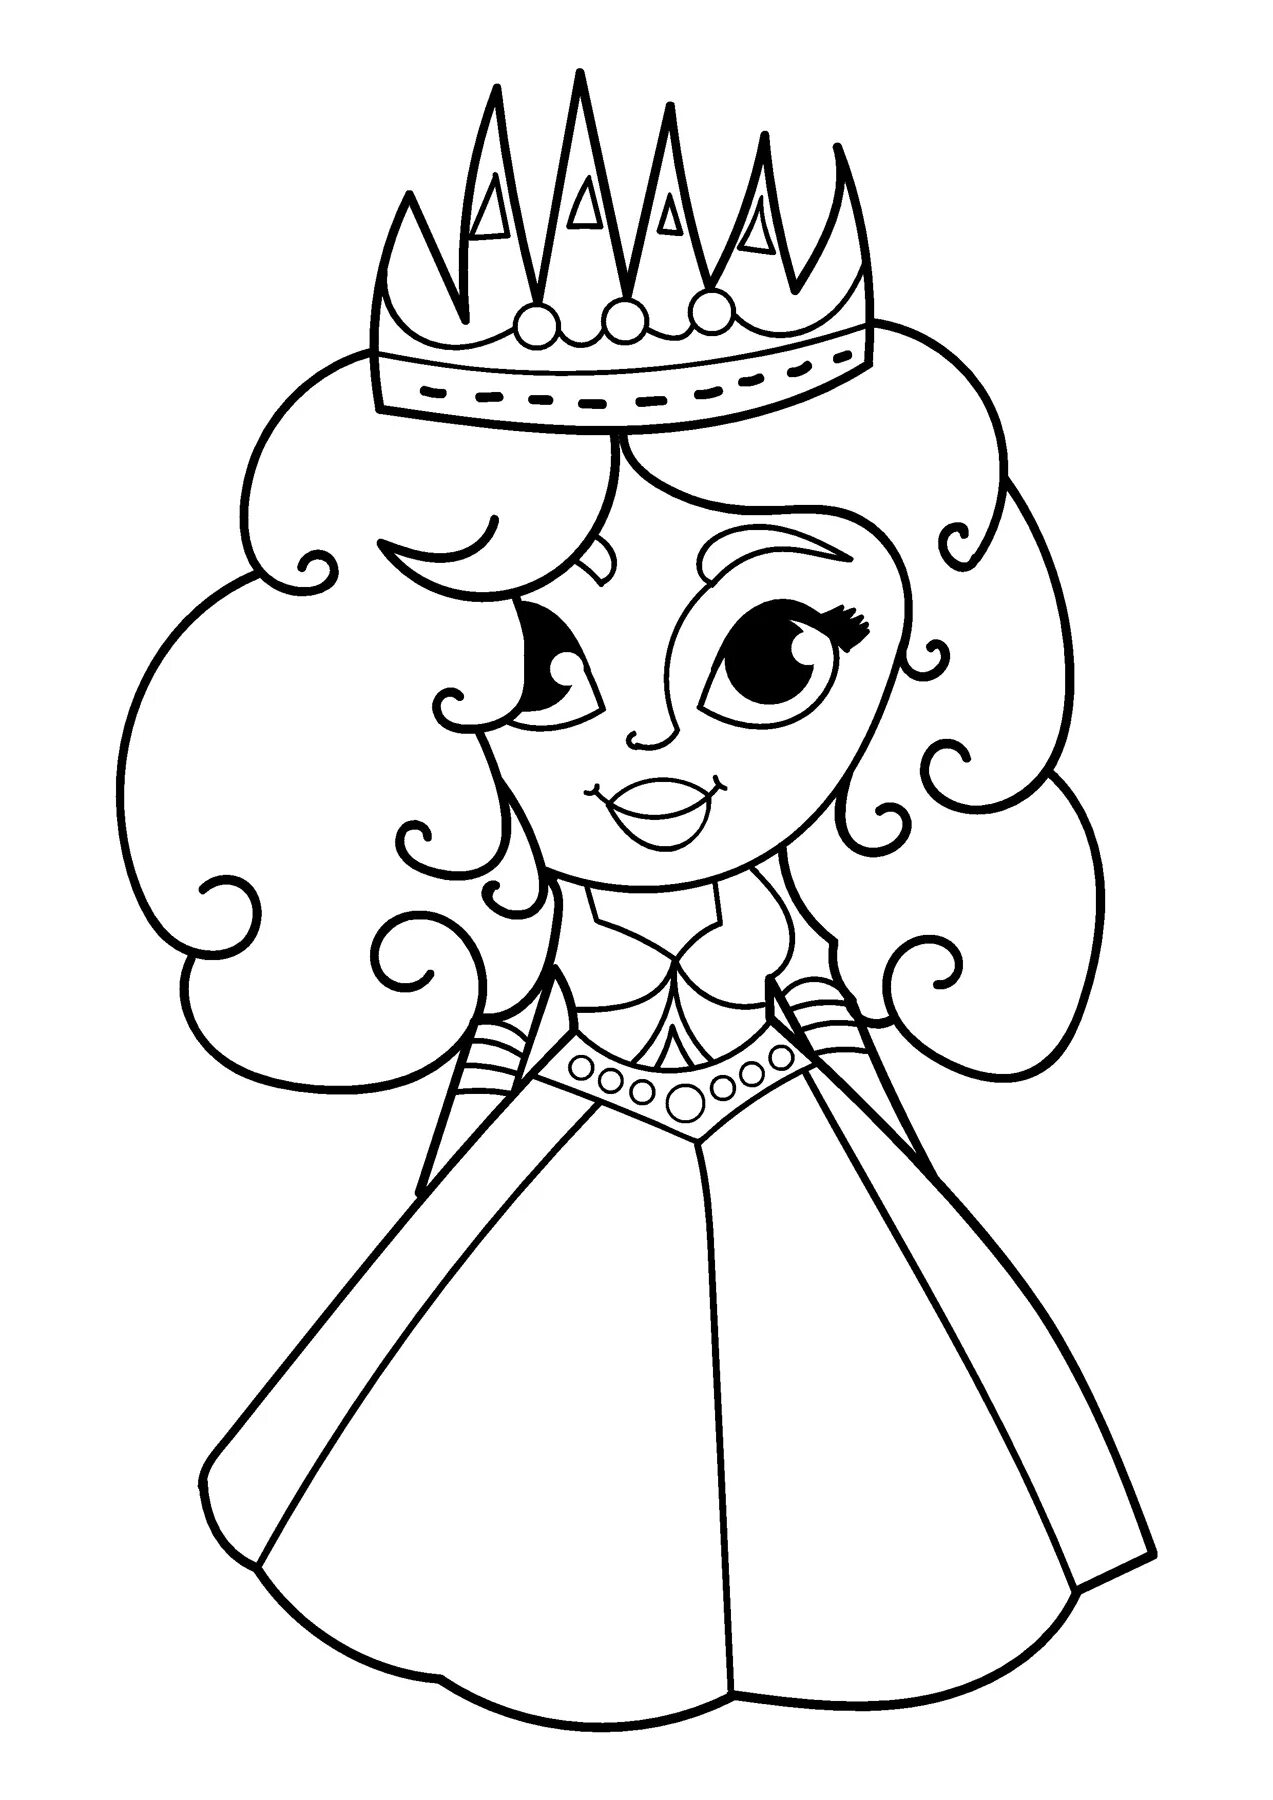 Violent princess coloring for girls 4 years old